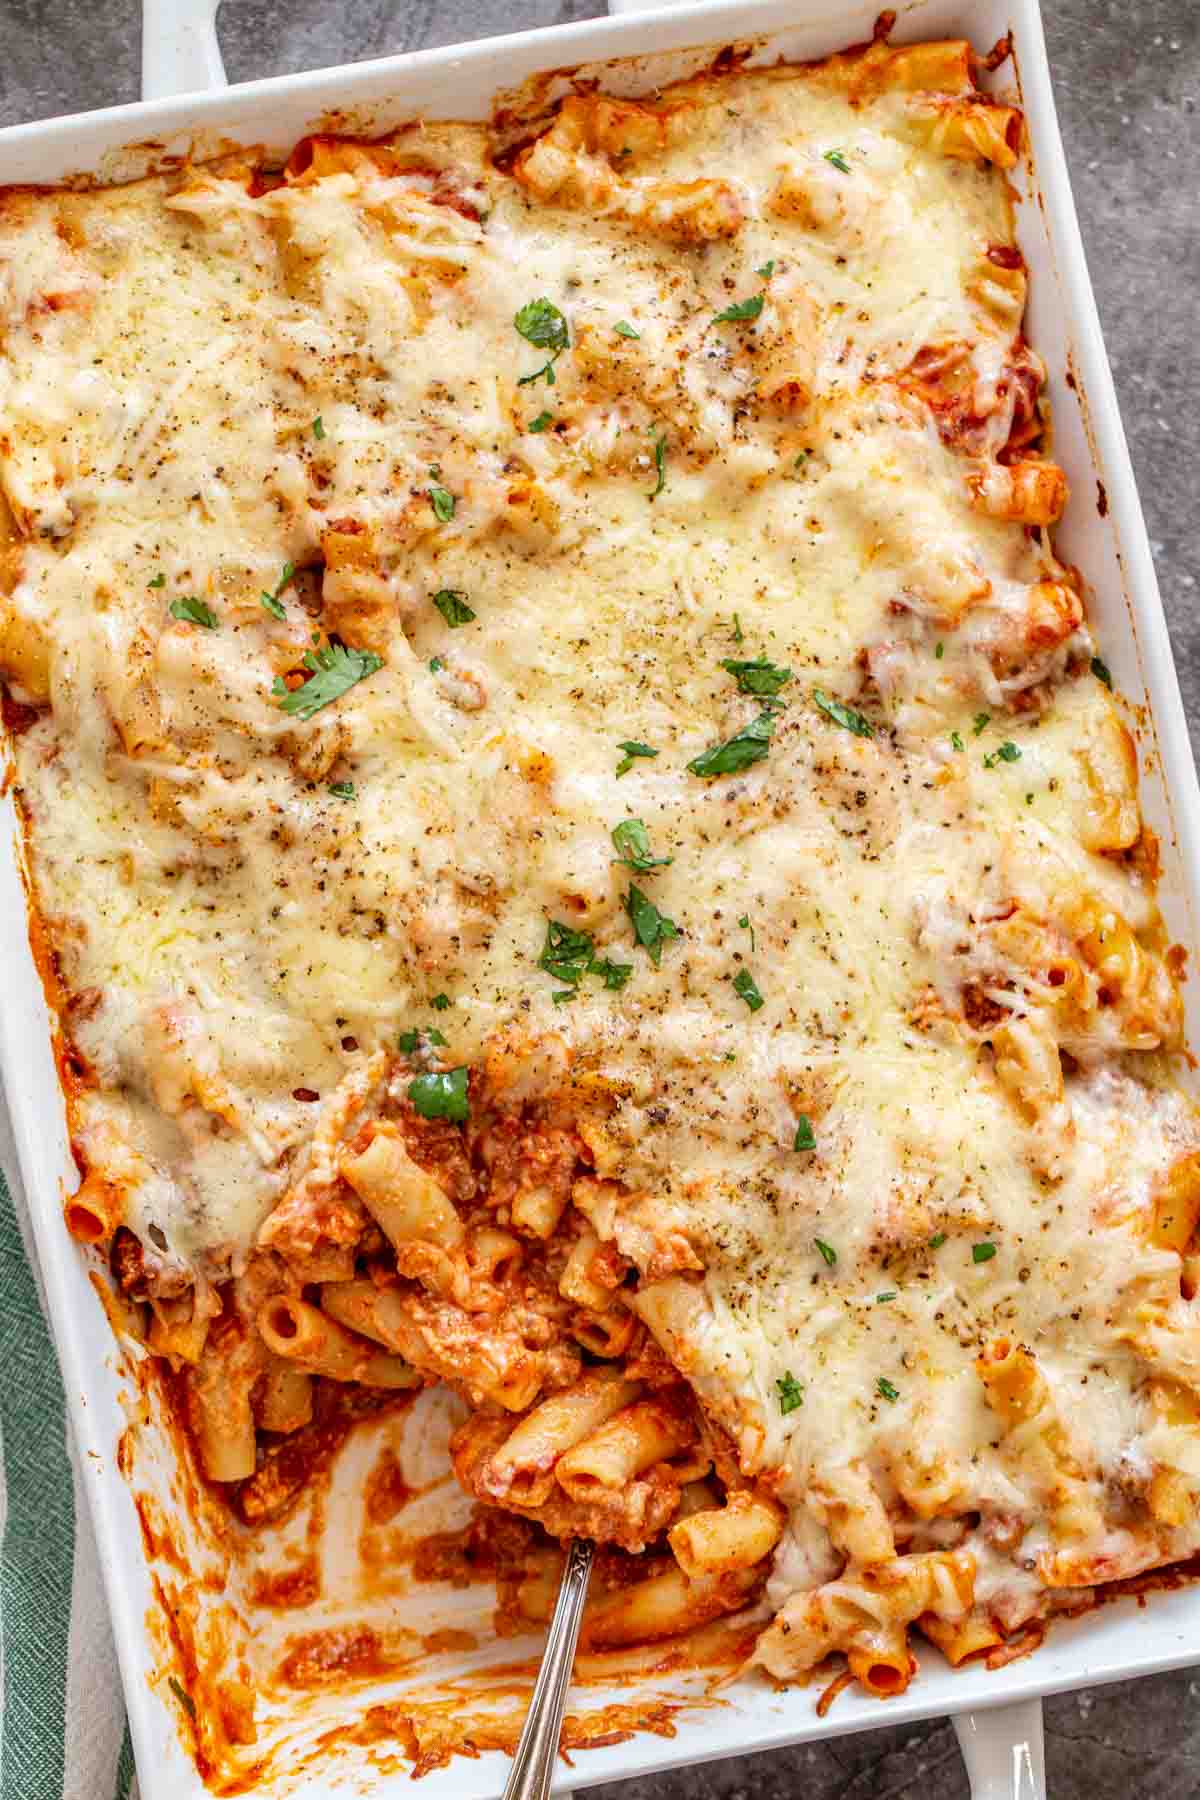 Baked ziti in a white casserole dish topped with fresh chopped greens and black pepper.